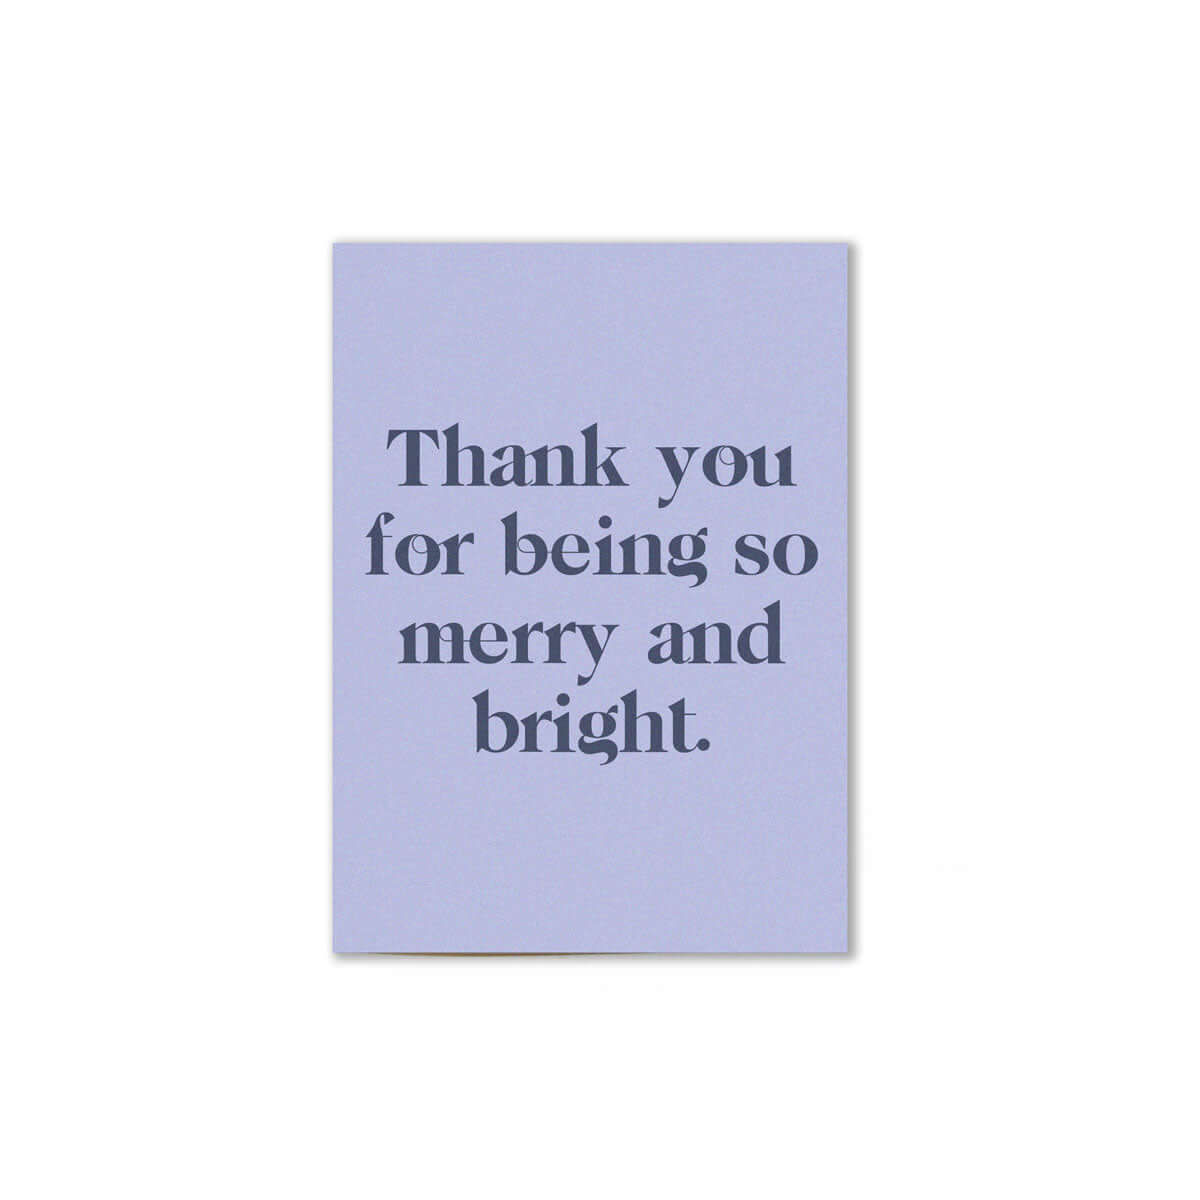 Light blue "Merry and Bright Gratitude Card" with text on the cover that reads "thank you for being so merry and bright"